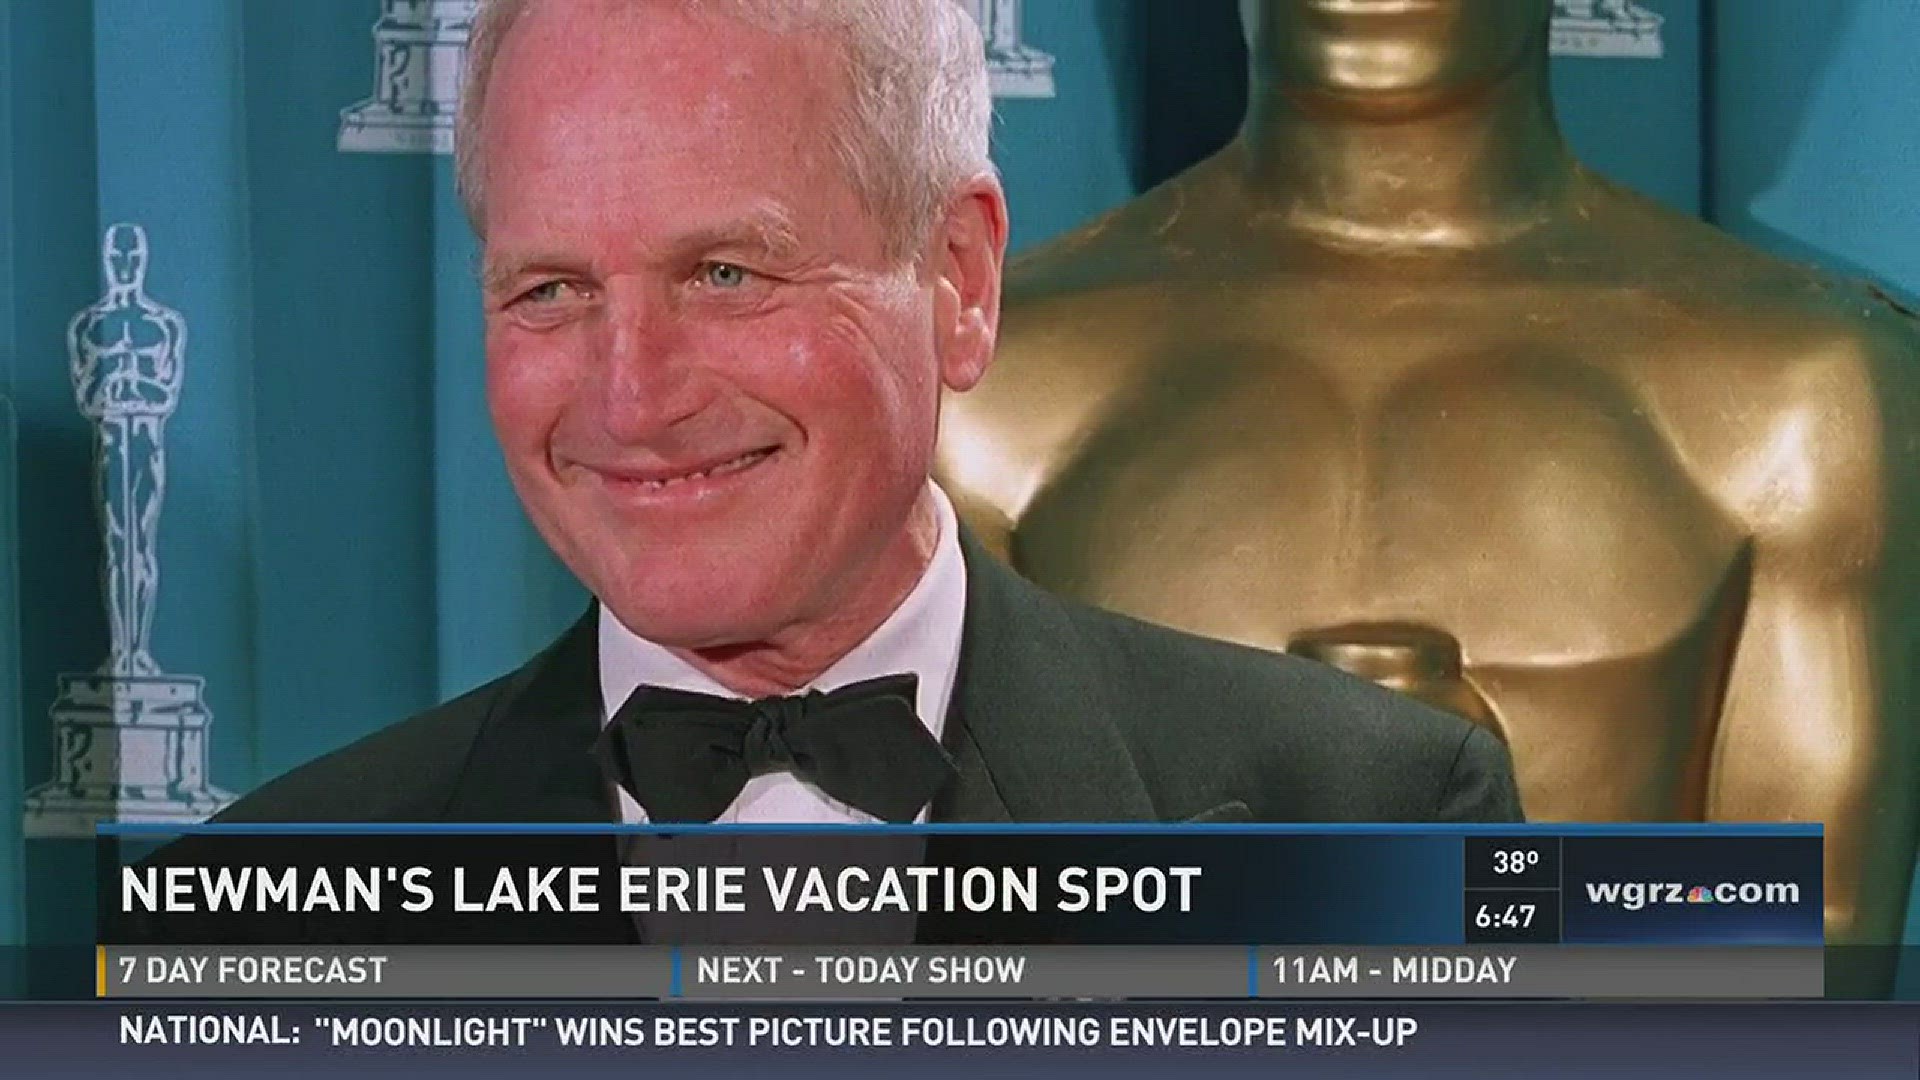 Paul Newman's Lake Erie vacation spot